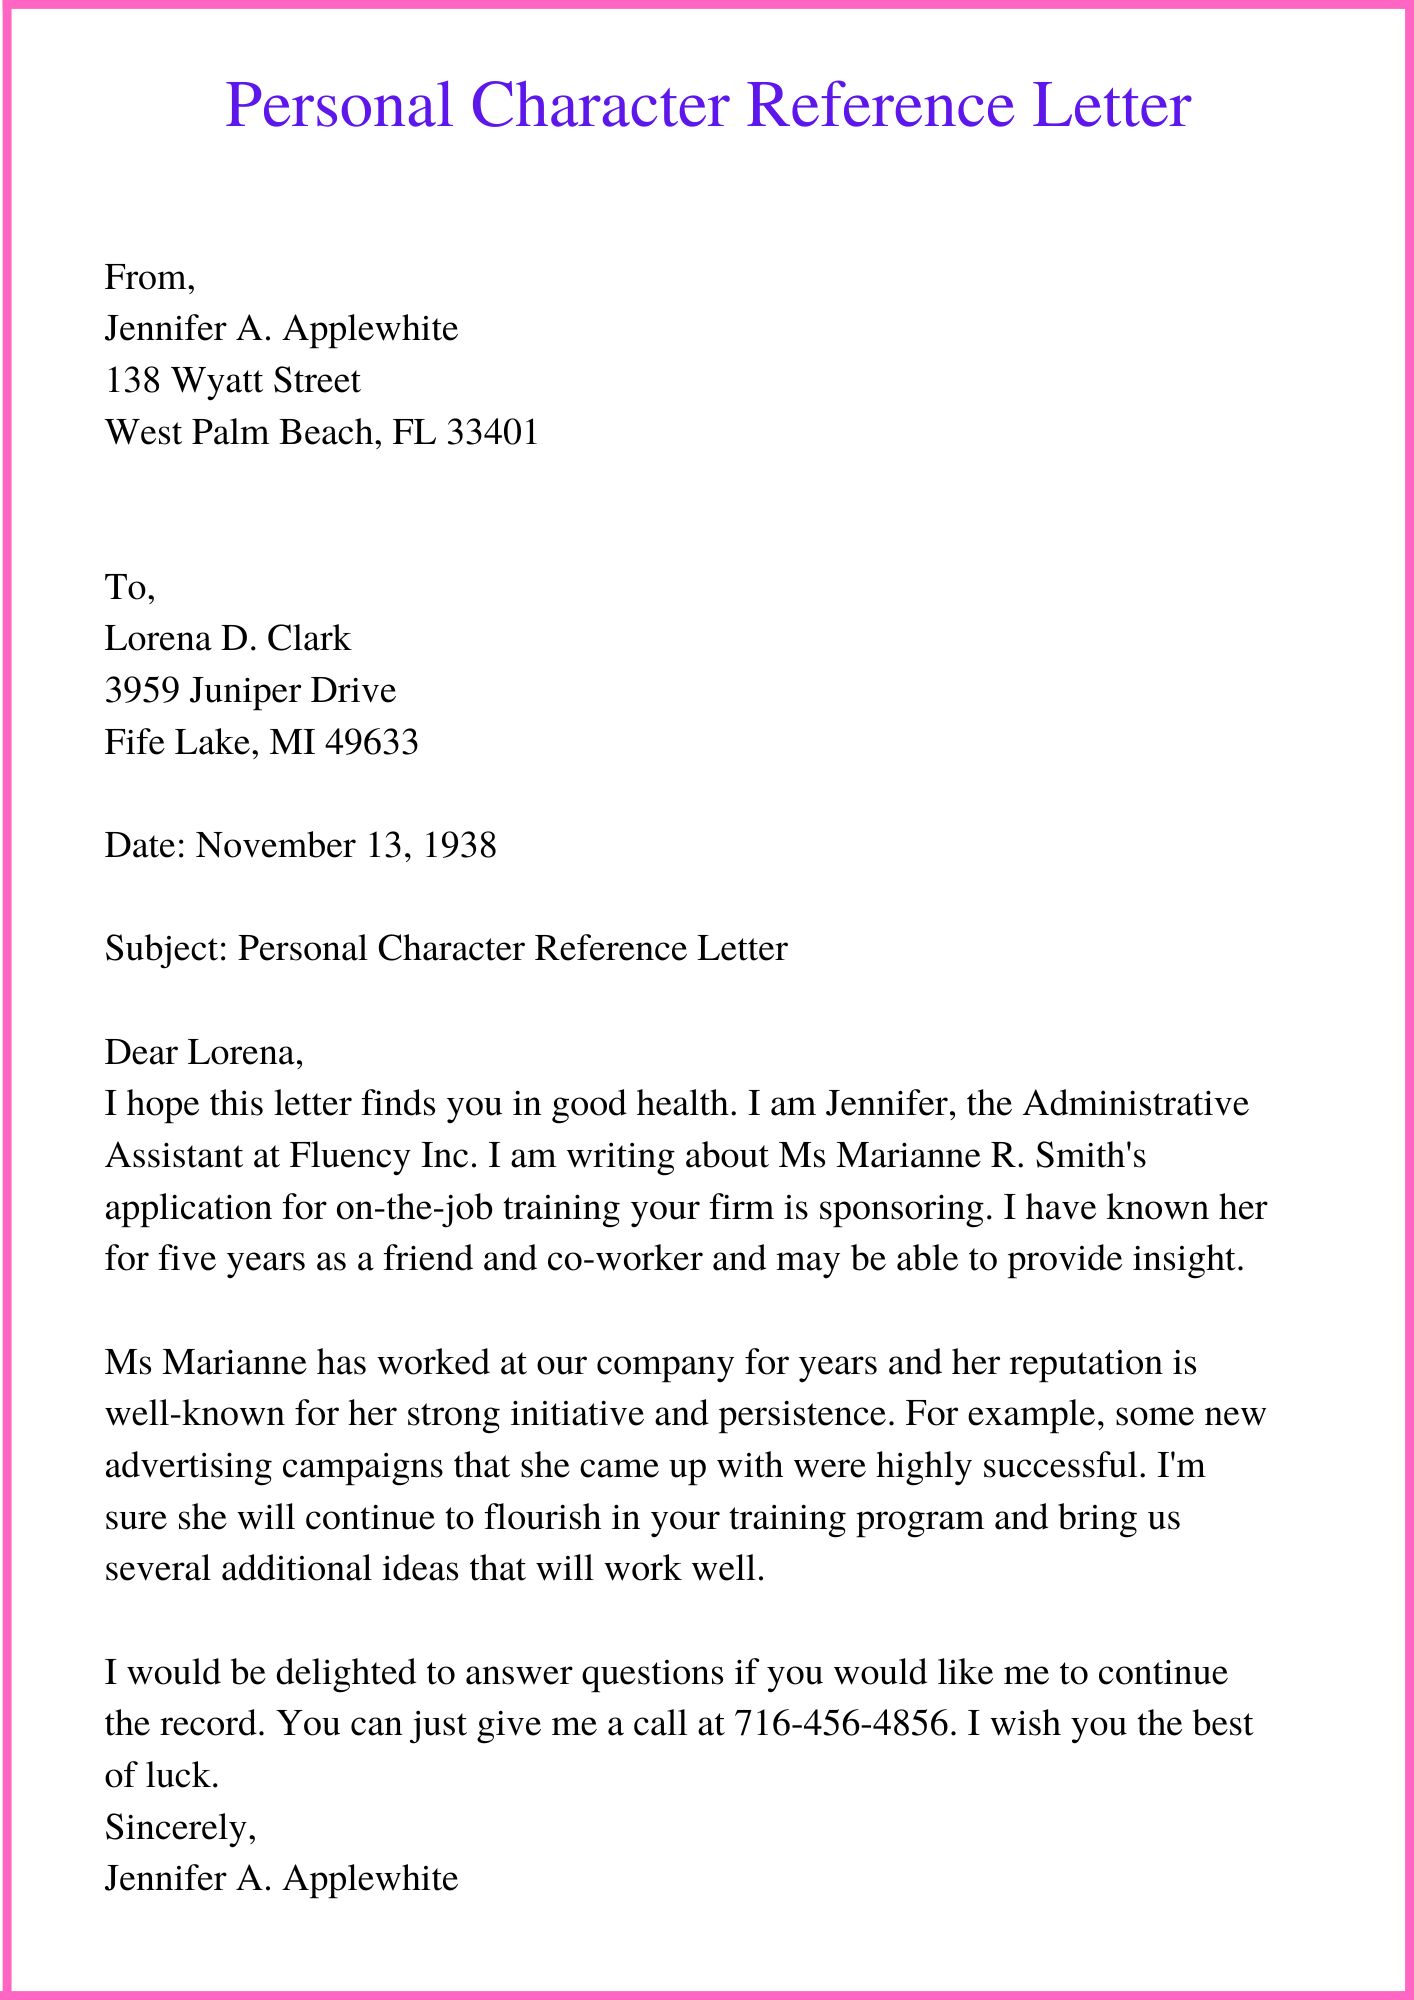 Sample Personal Character Reference Letter